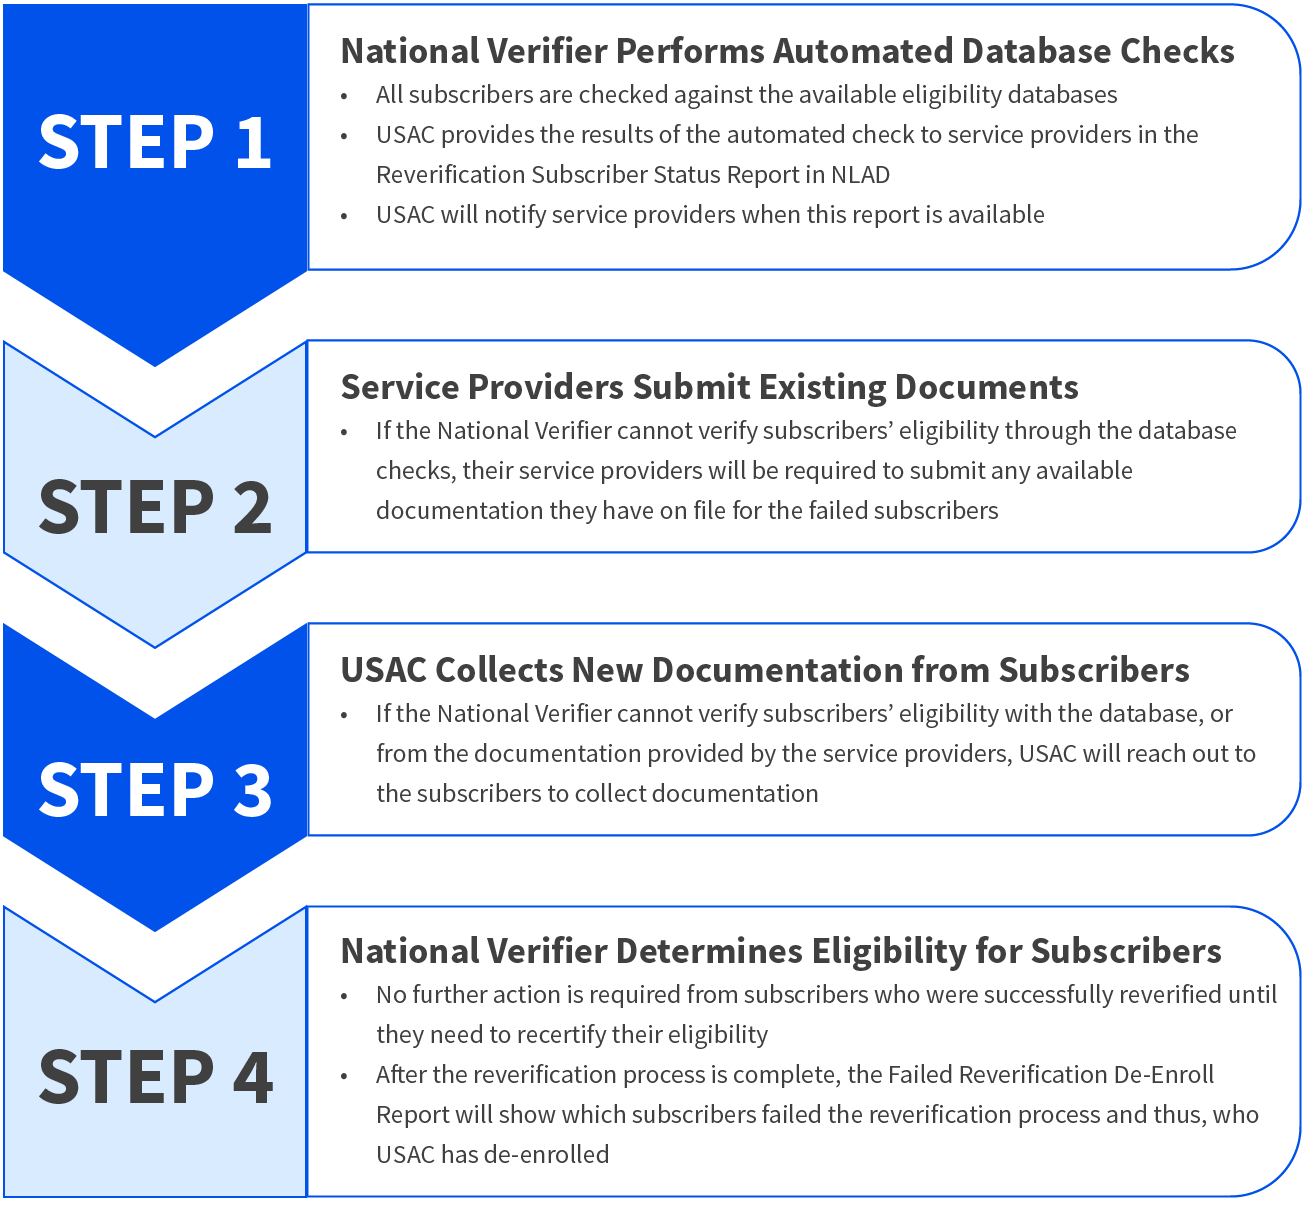 This image provides a step-by-step overview of the reverification process